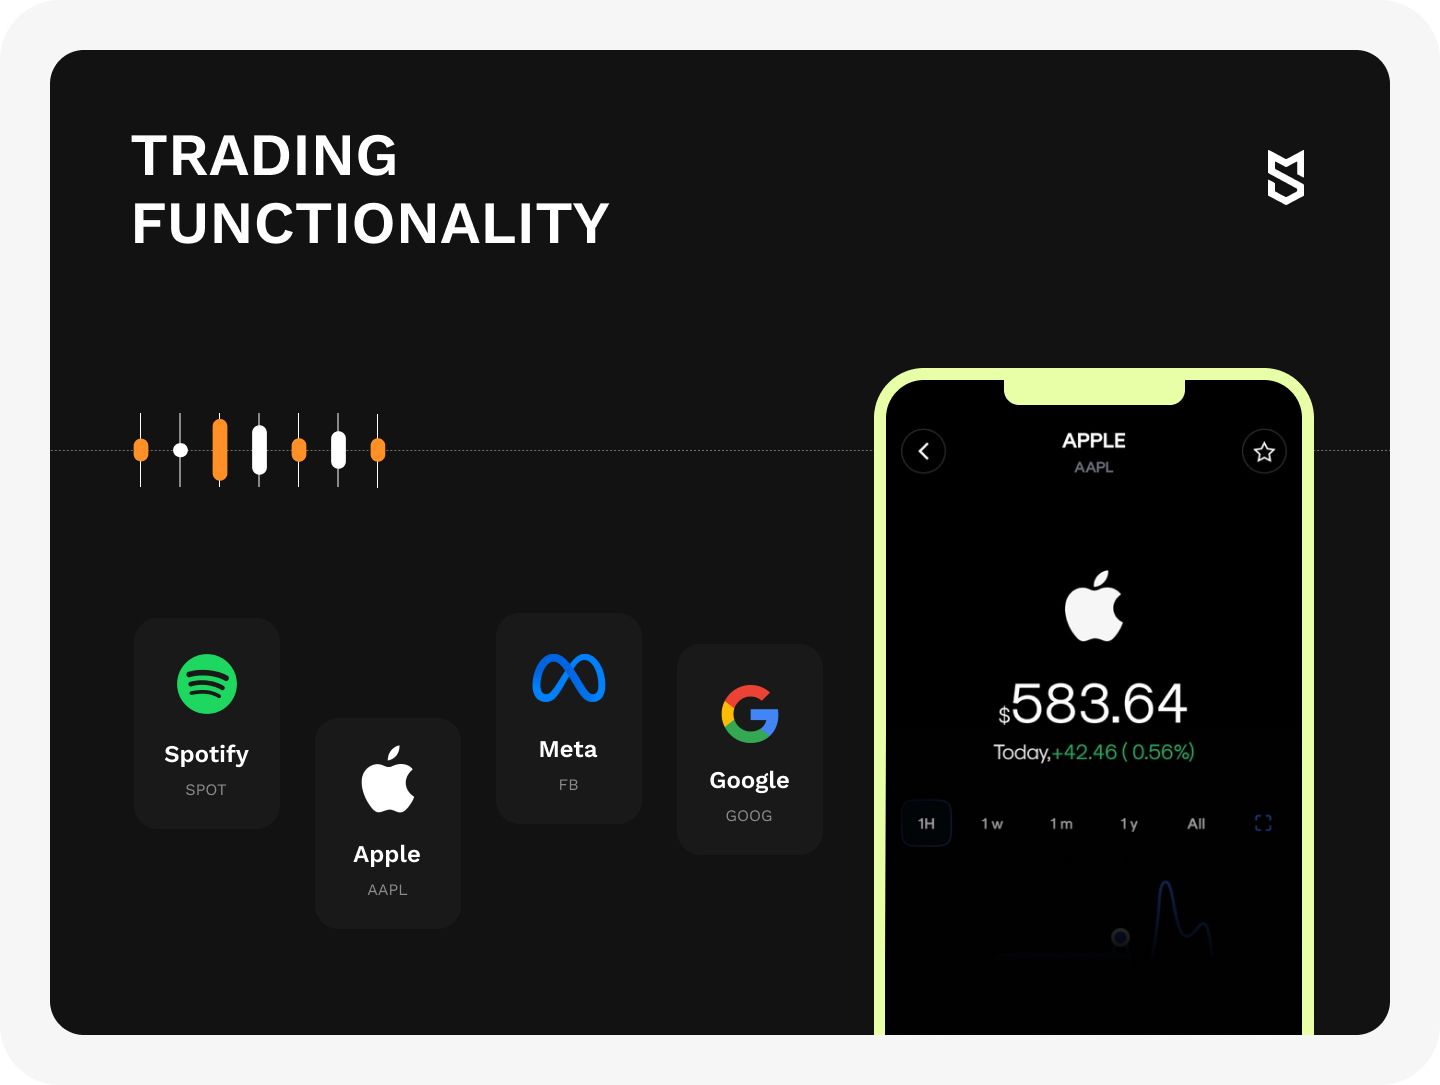 Trading functionality